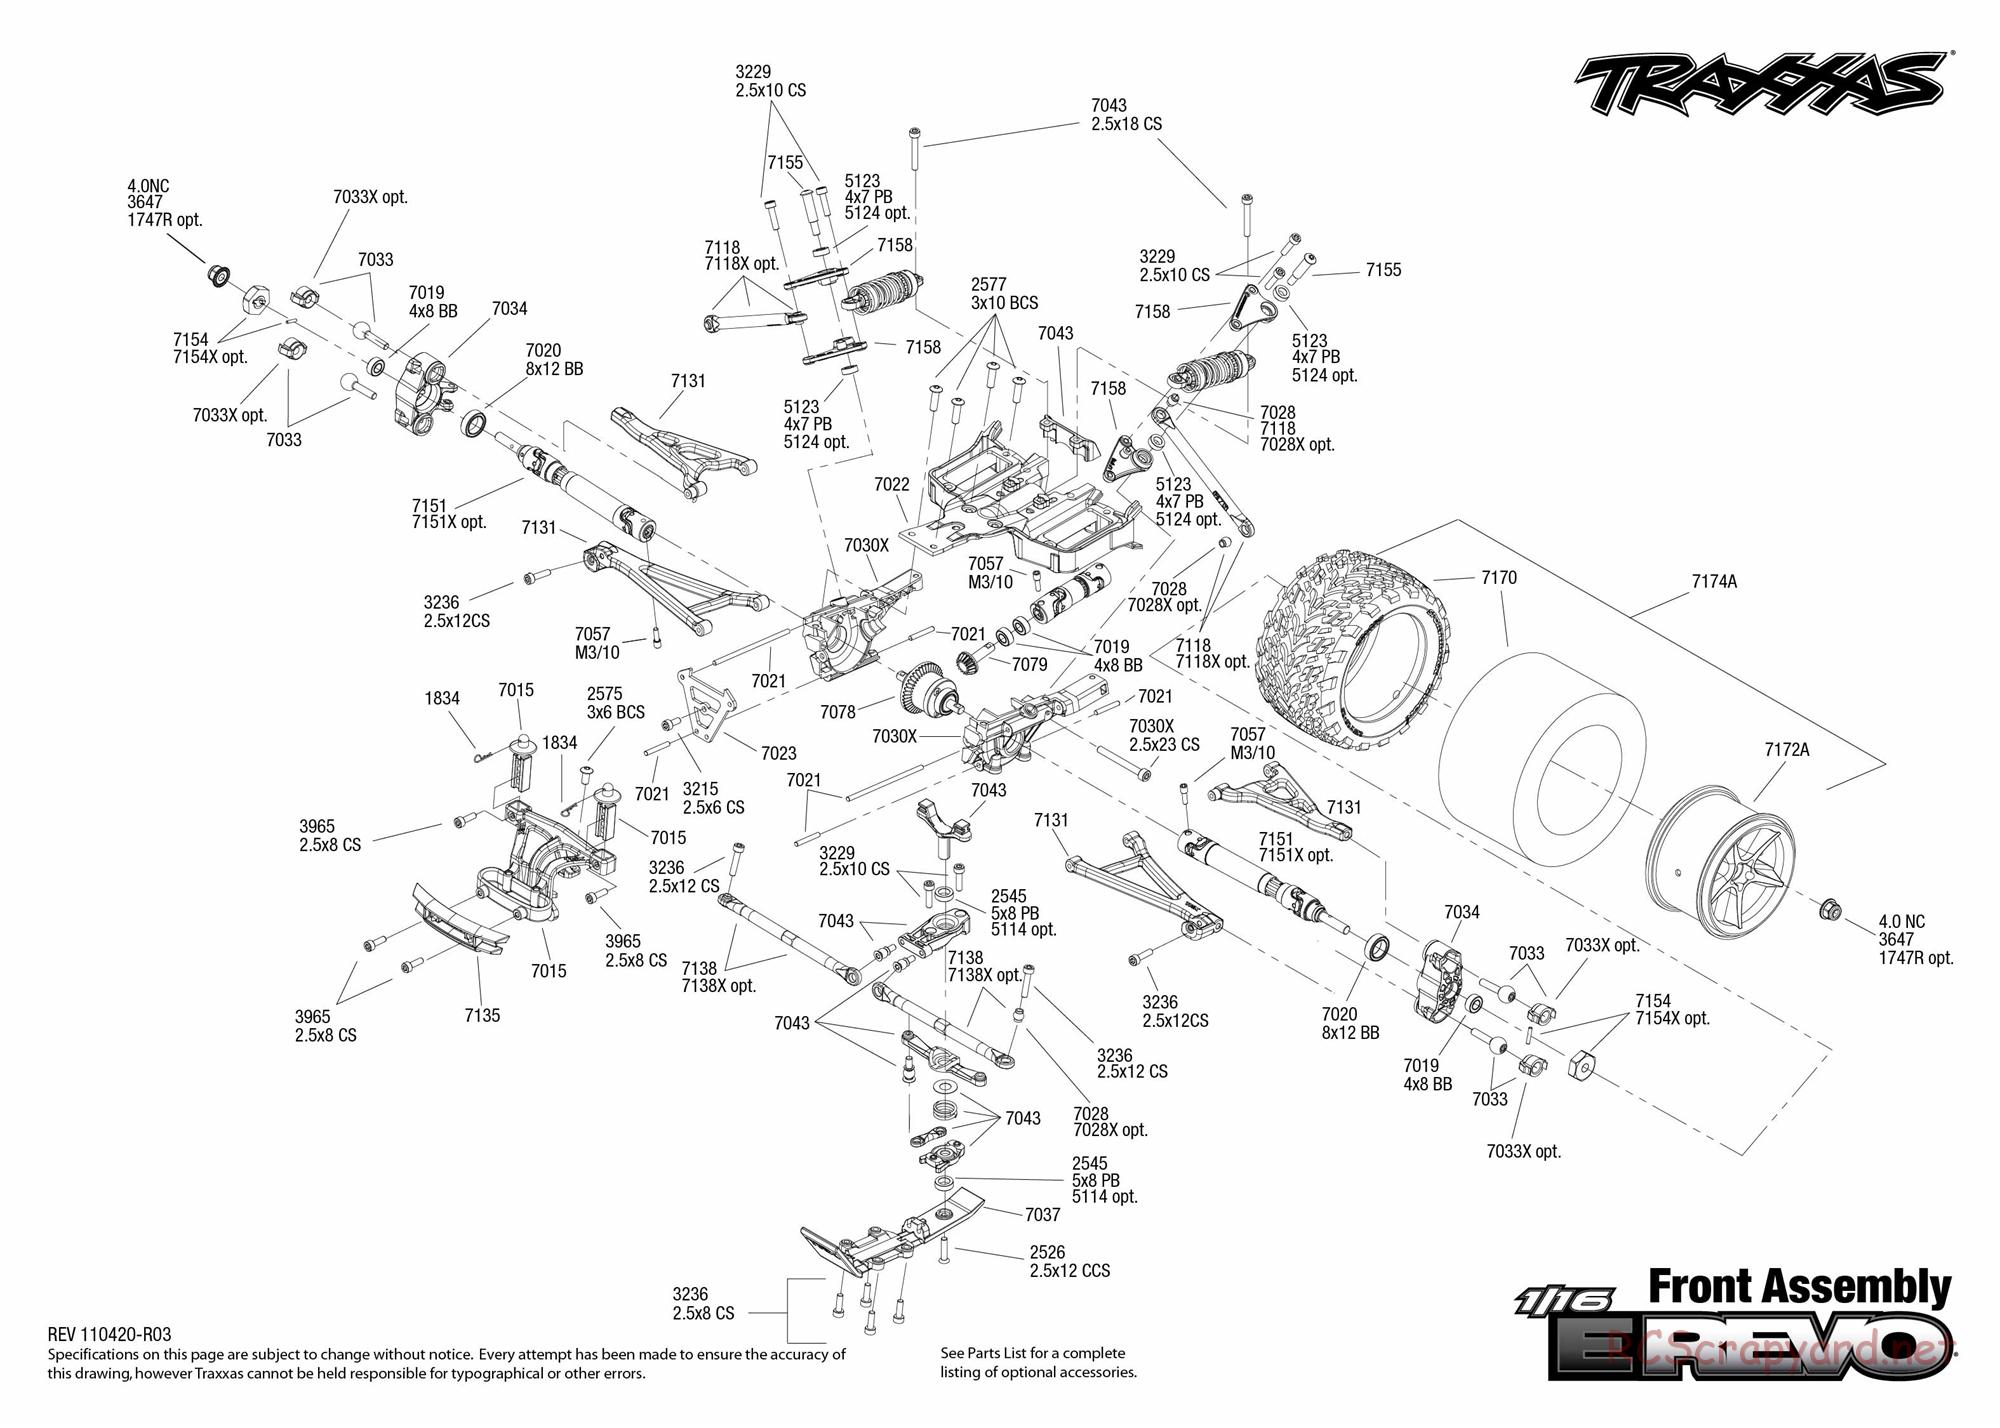 Traxxas - 1/16 E-Revo Brushed (2010) - Exploded Views - Page 2